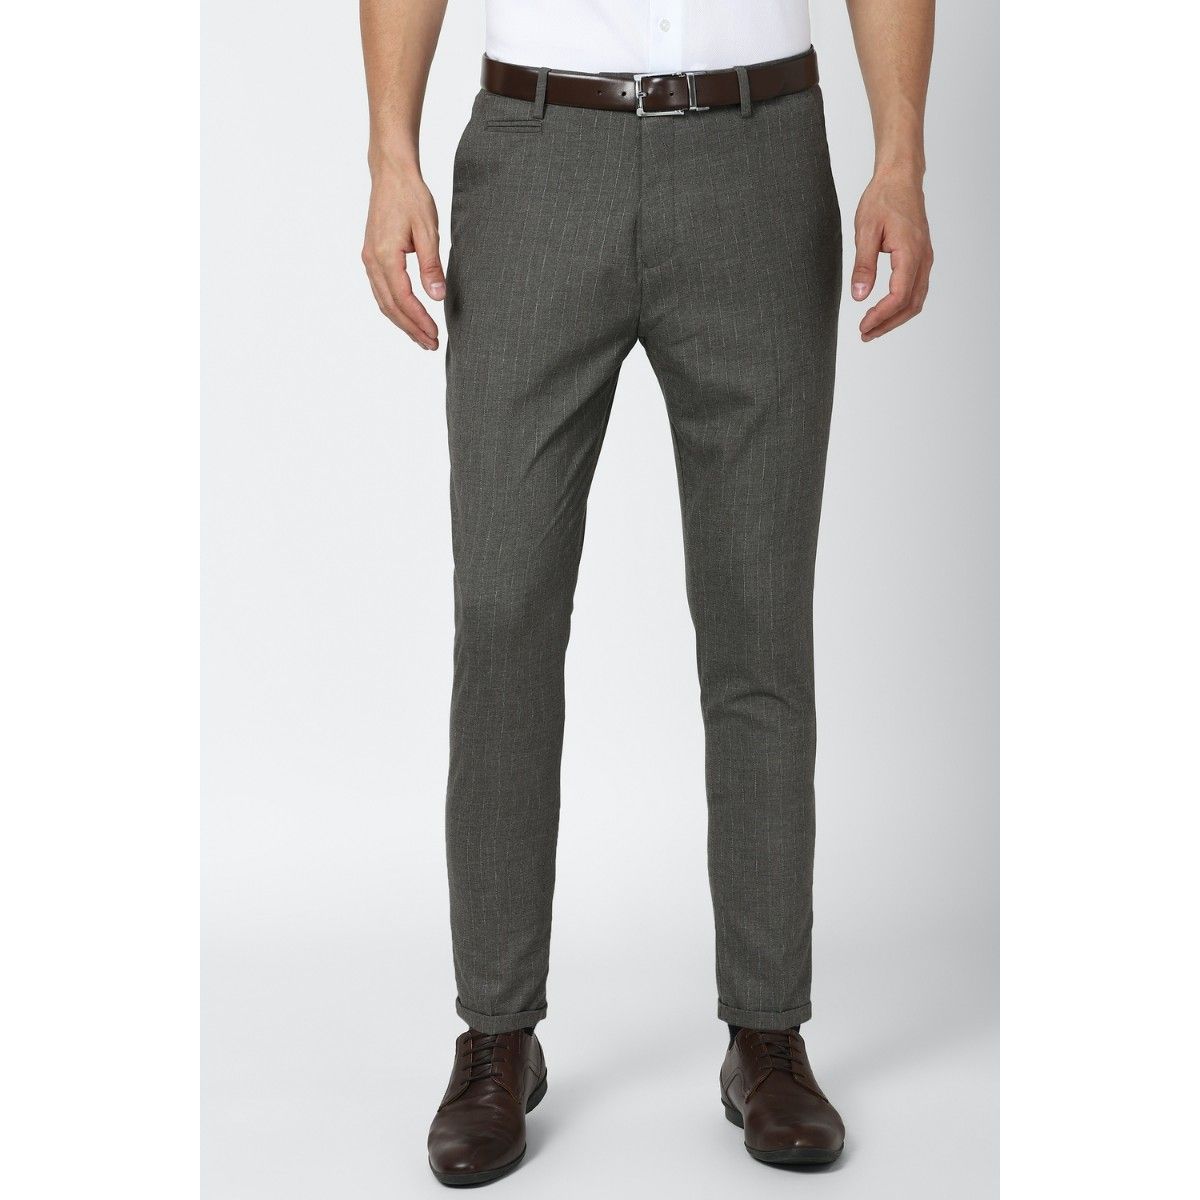 Buy Peter England Men Grey Check Carrot Fit Formal Trousers Online